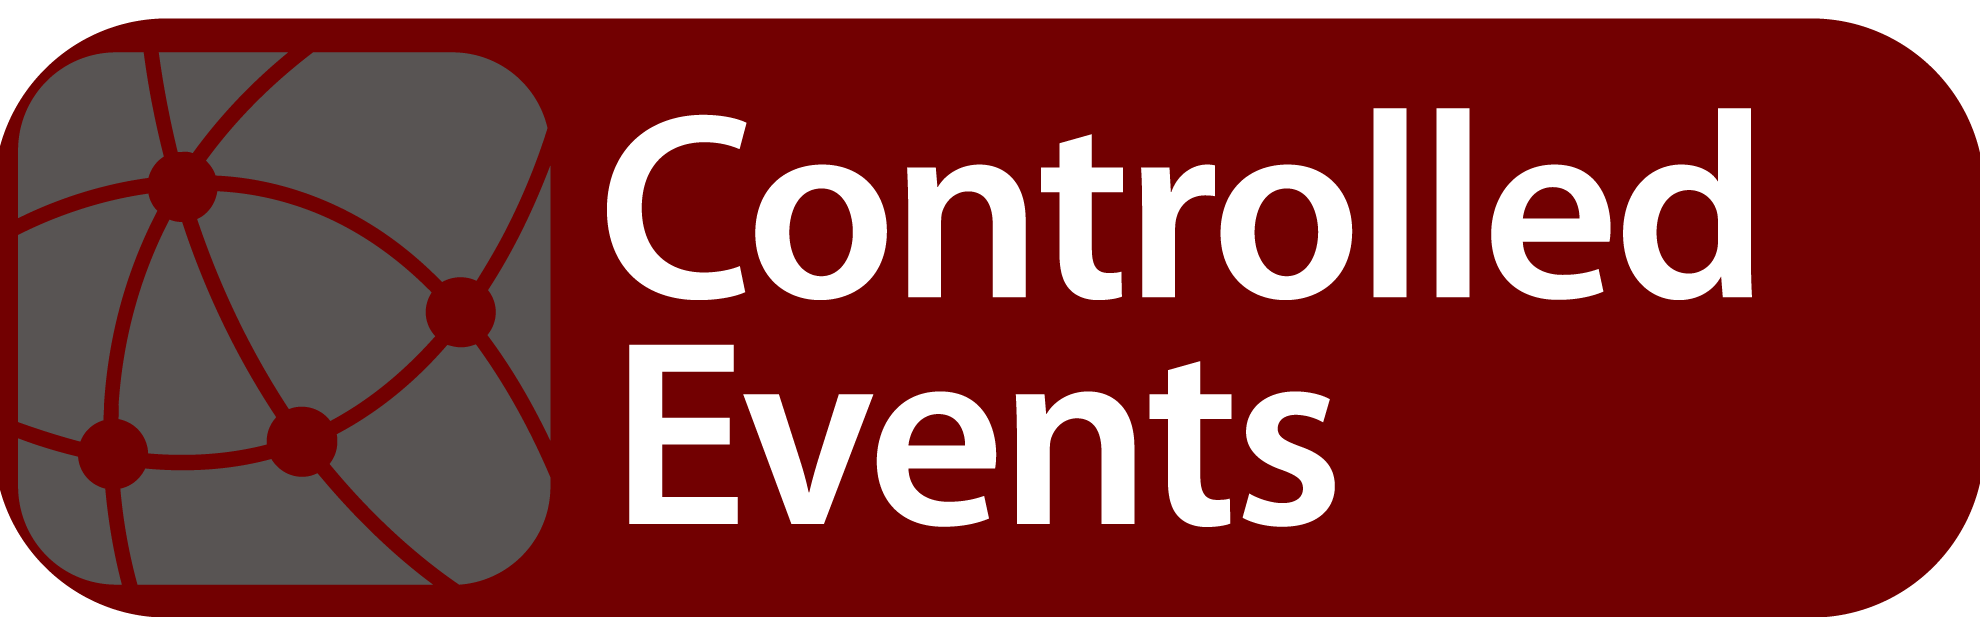 Controlled Events